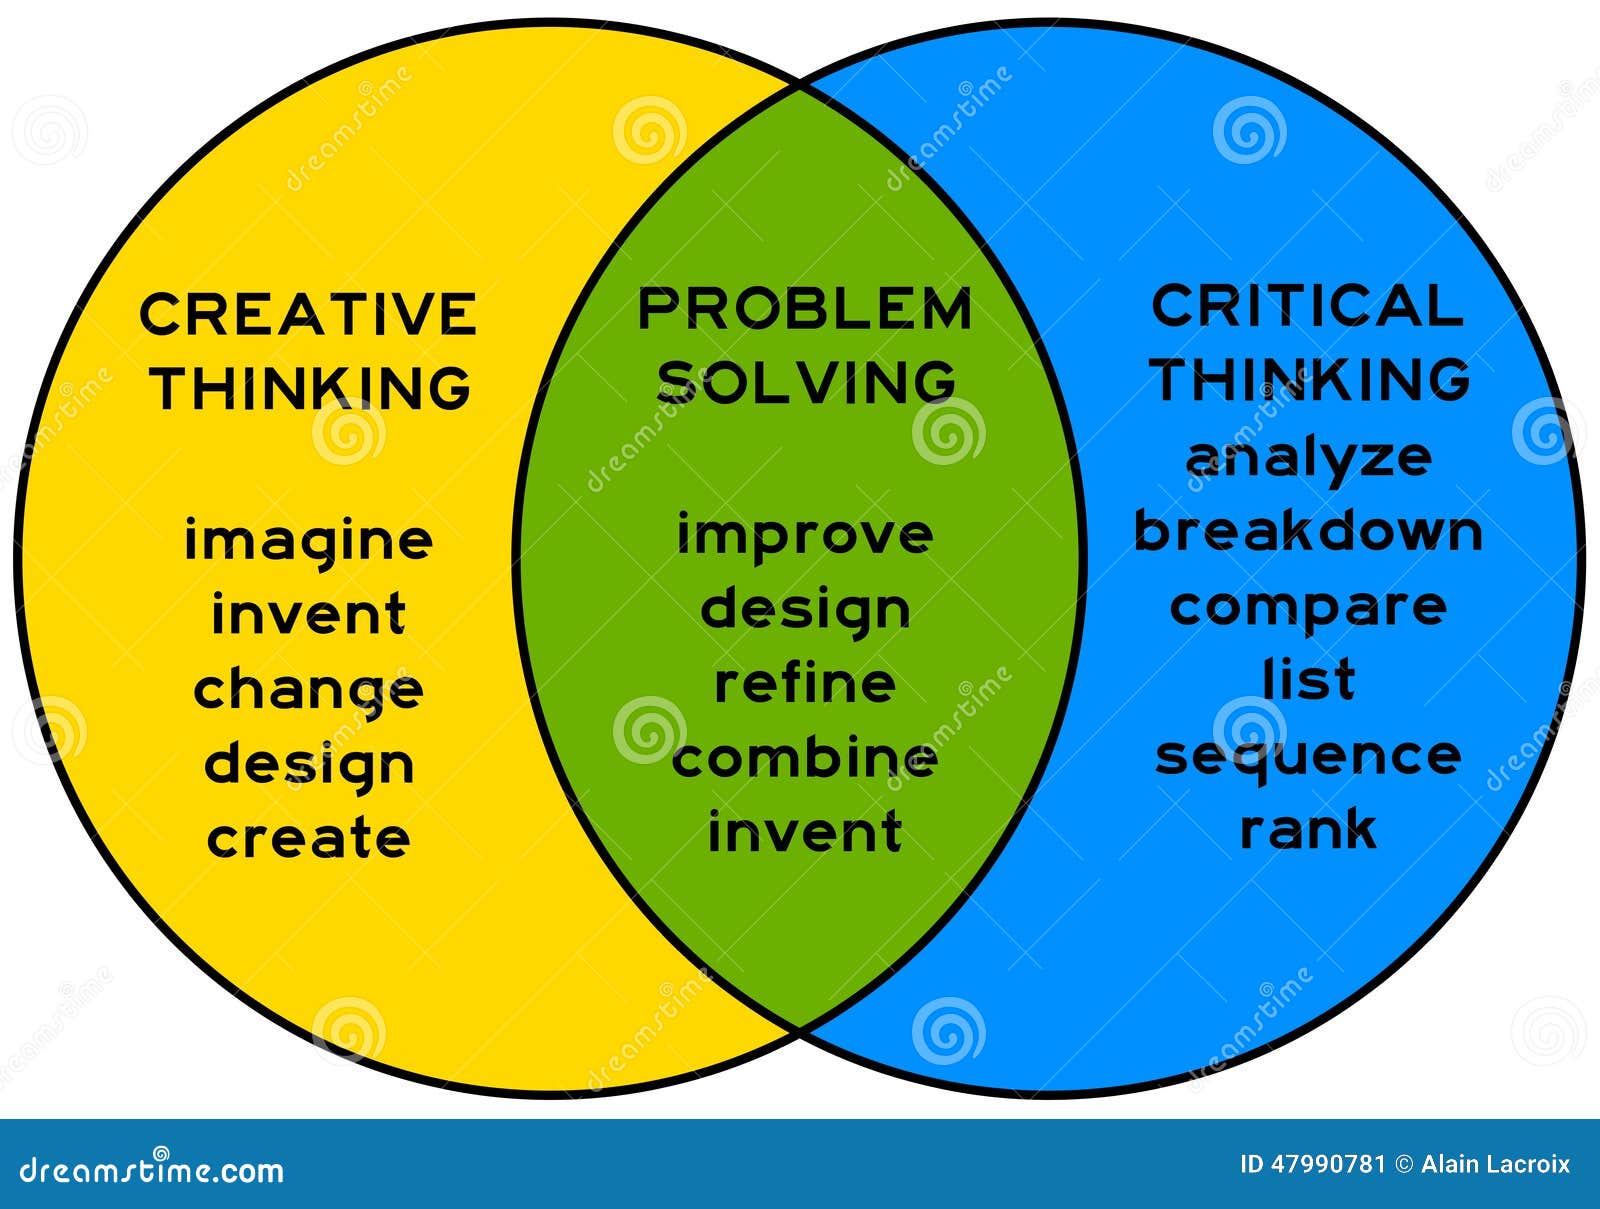 critical thinking and problem solving skills